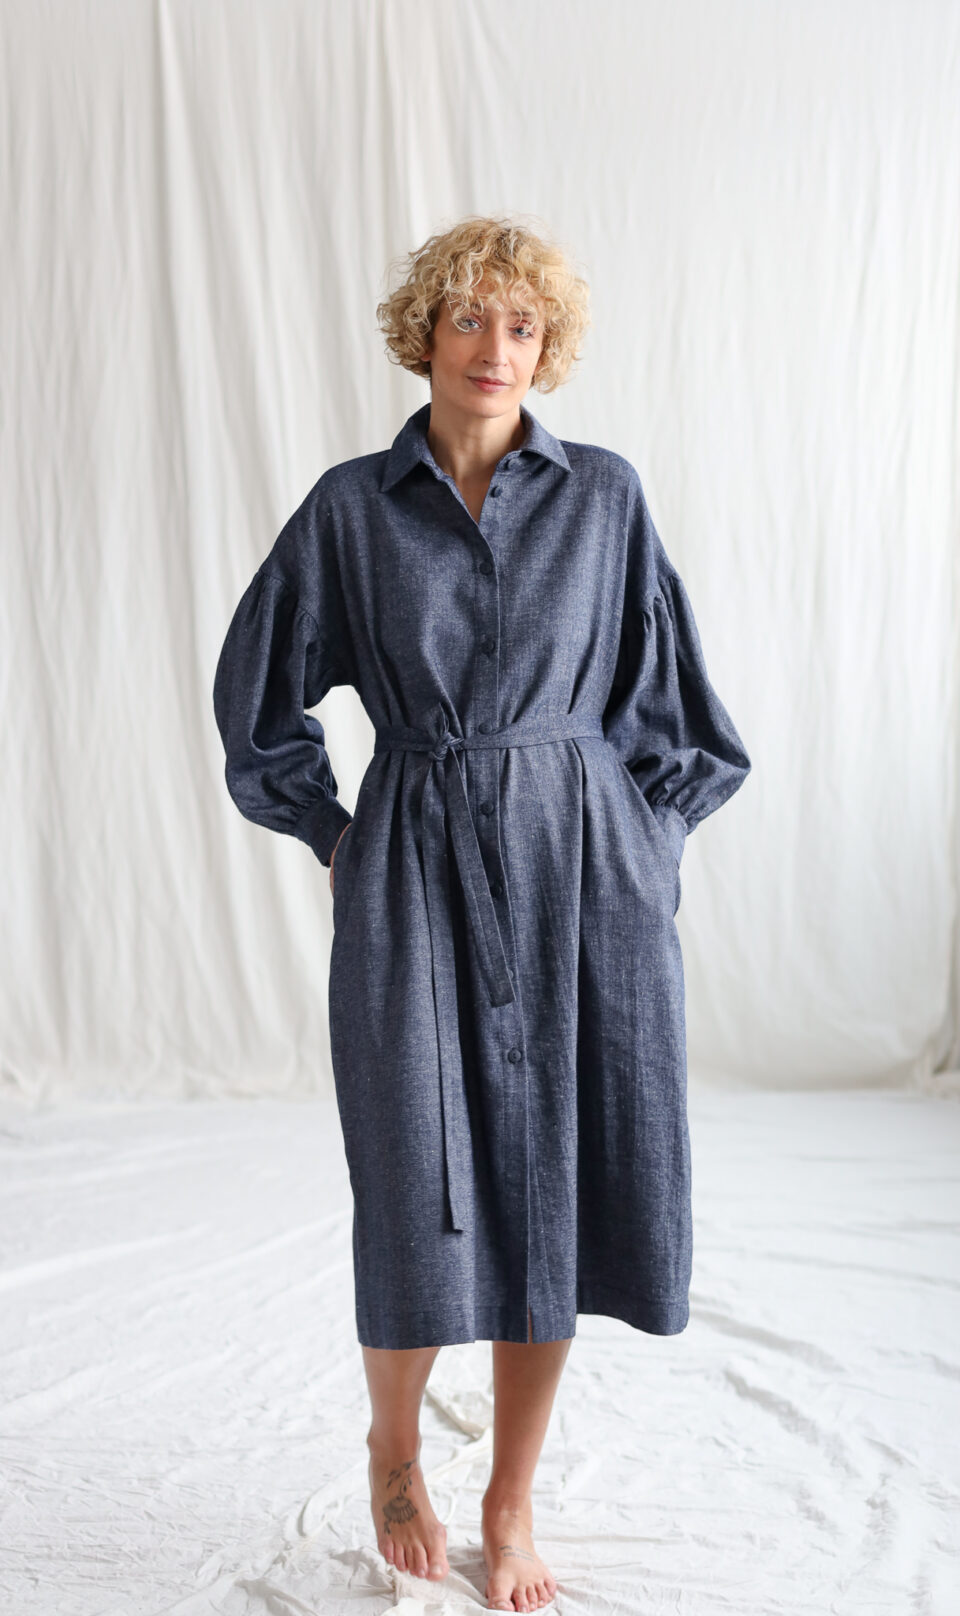 Linen wool shirtdress with dropped puffy sleeves | Dress | Sustainable clothing | OffOn clothing